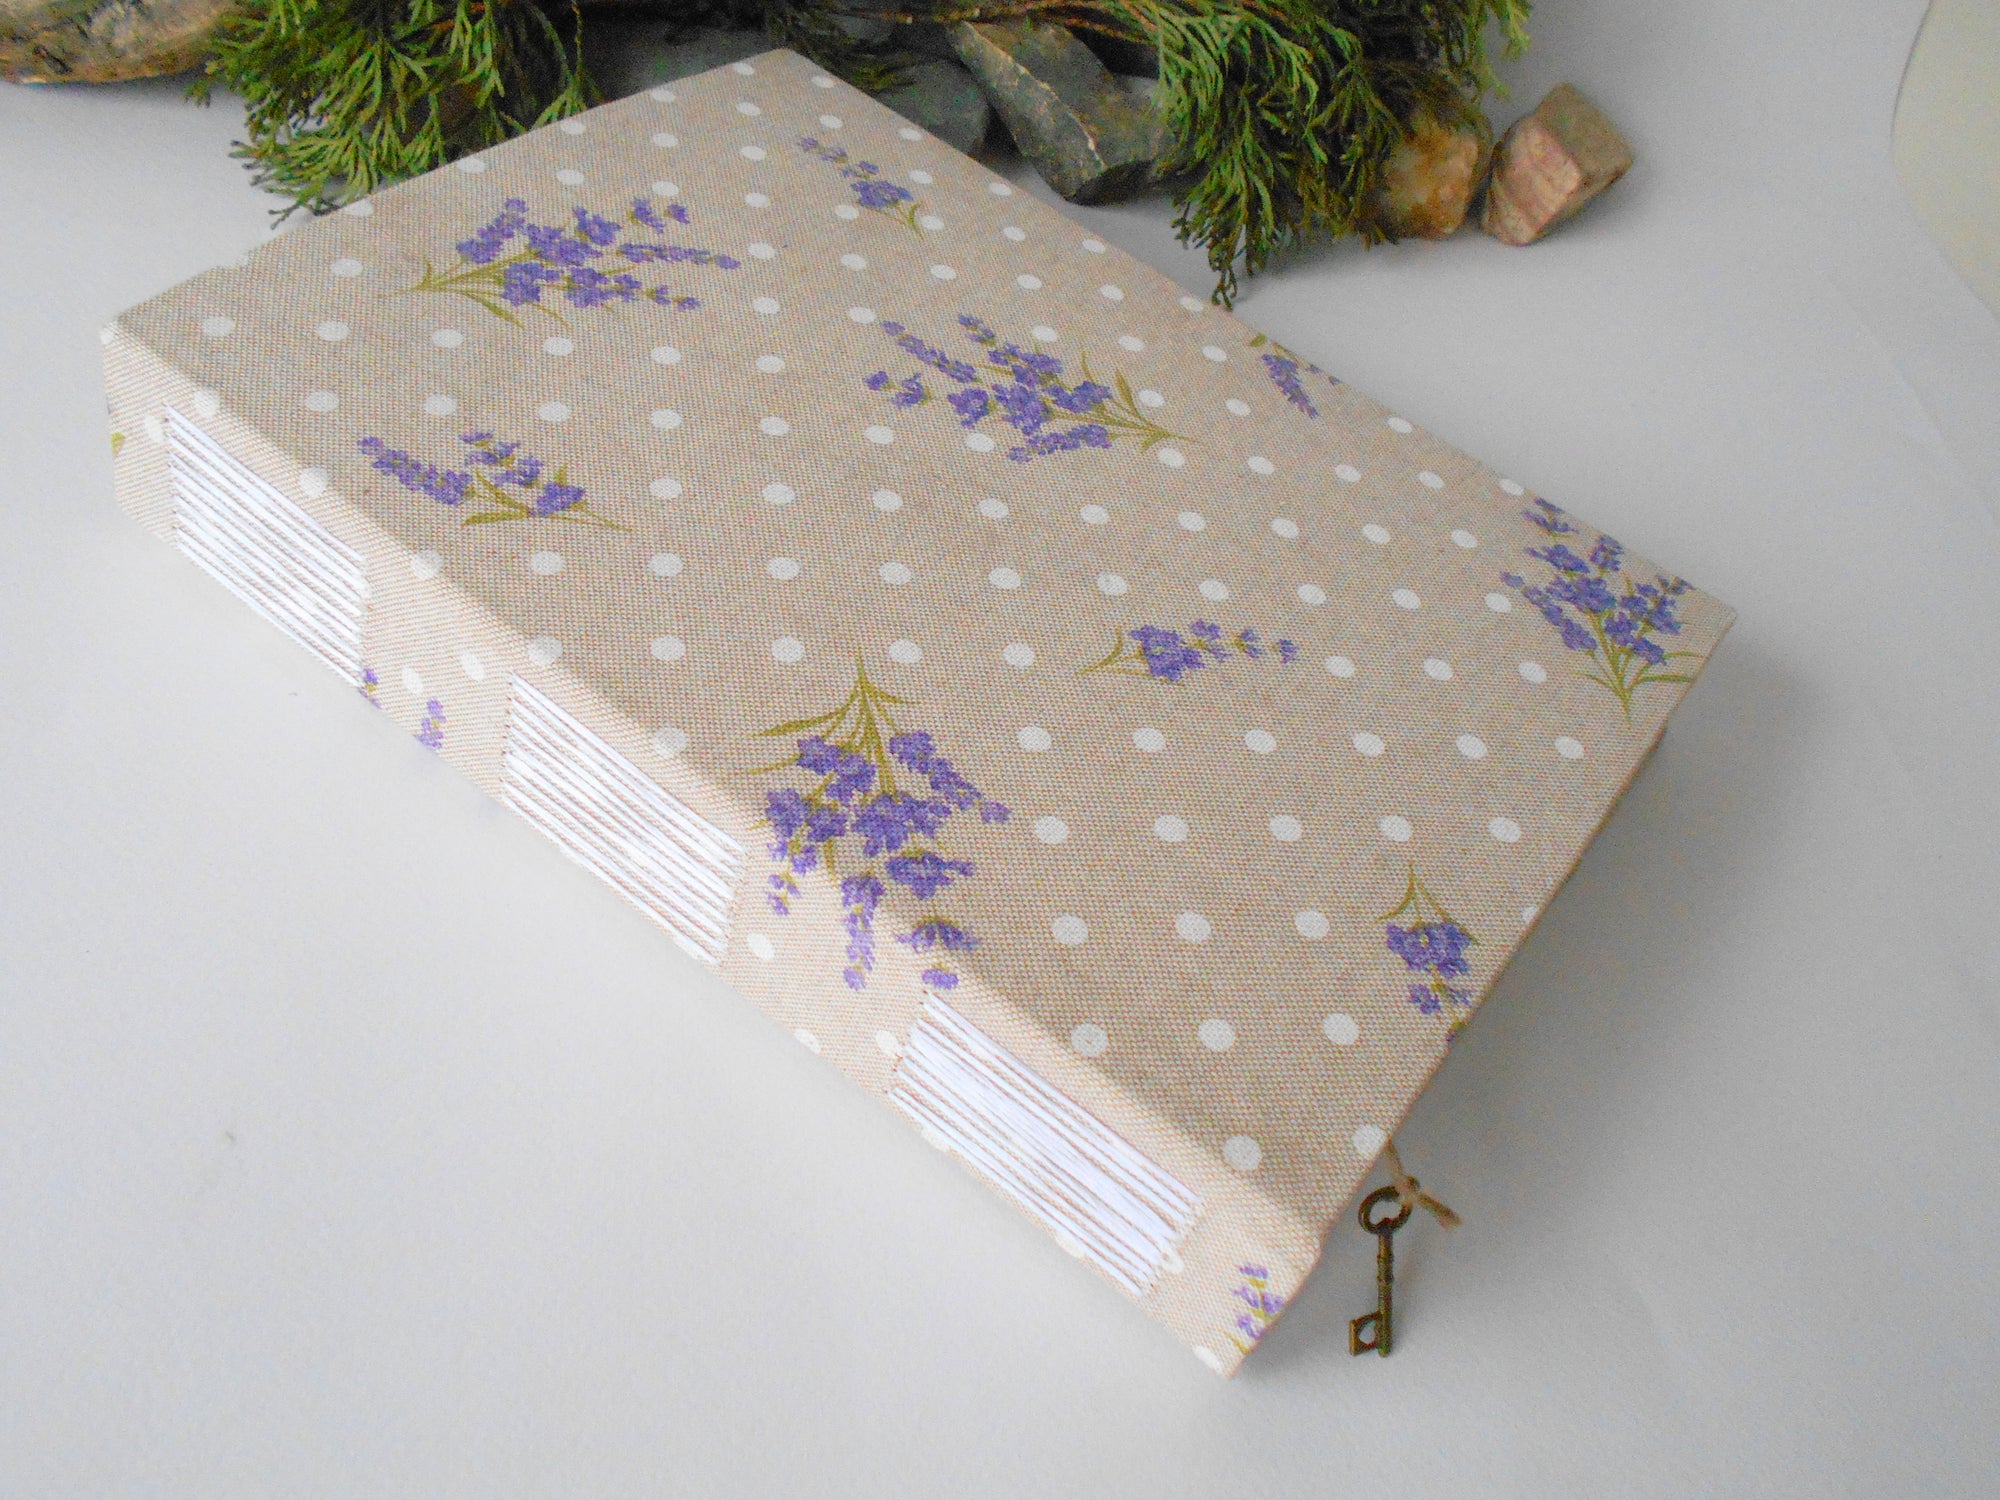 This is a handmade journal with Lavender cotton fabric hardcovers with Long-stitch triple binding that you can personalize in color. 